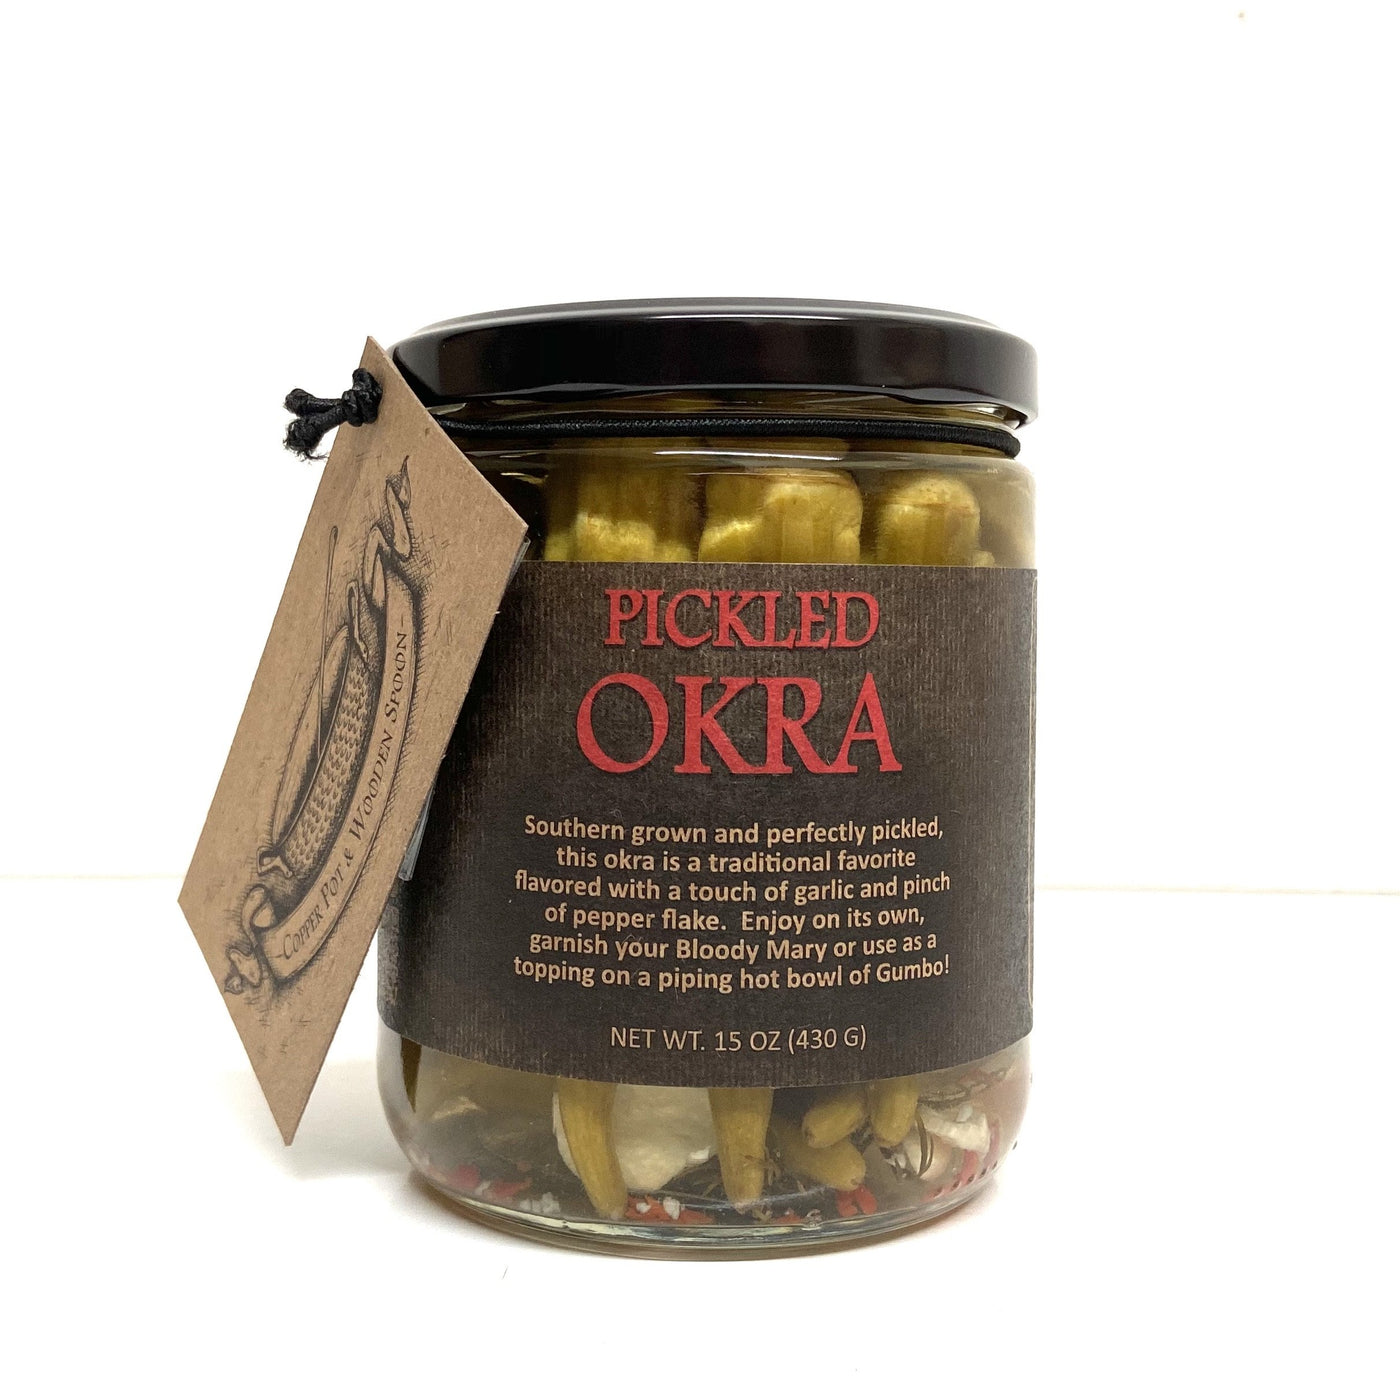 Local Pickled Okra by Copper Pot & Wooden Spoon